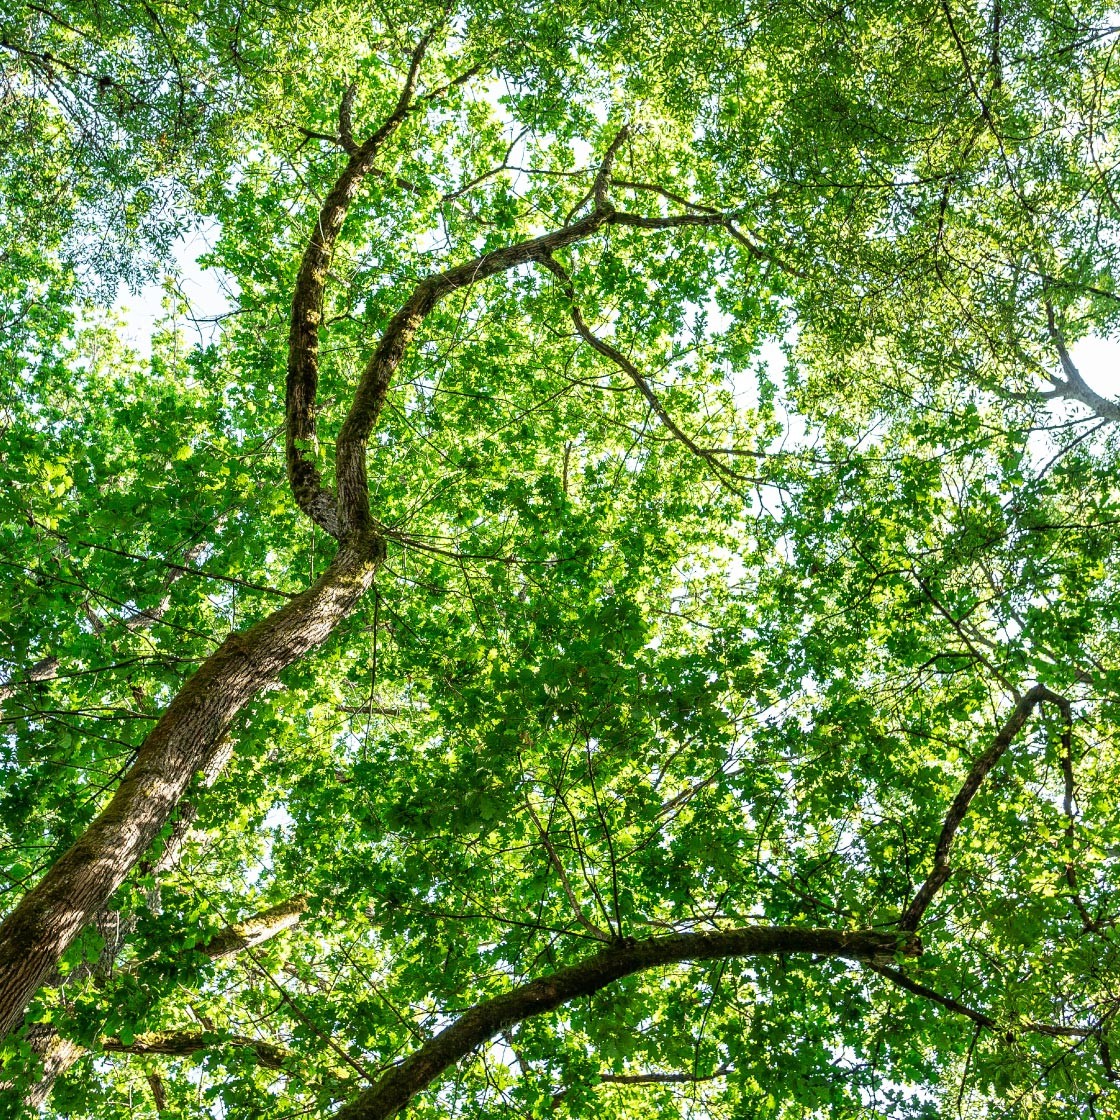 A healthy tree canopy which will help protect against climate change